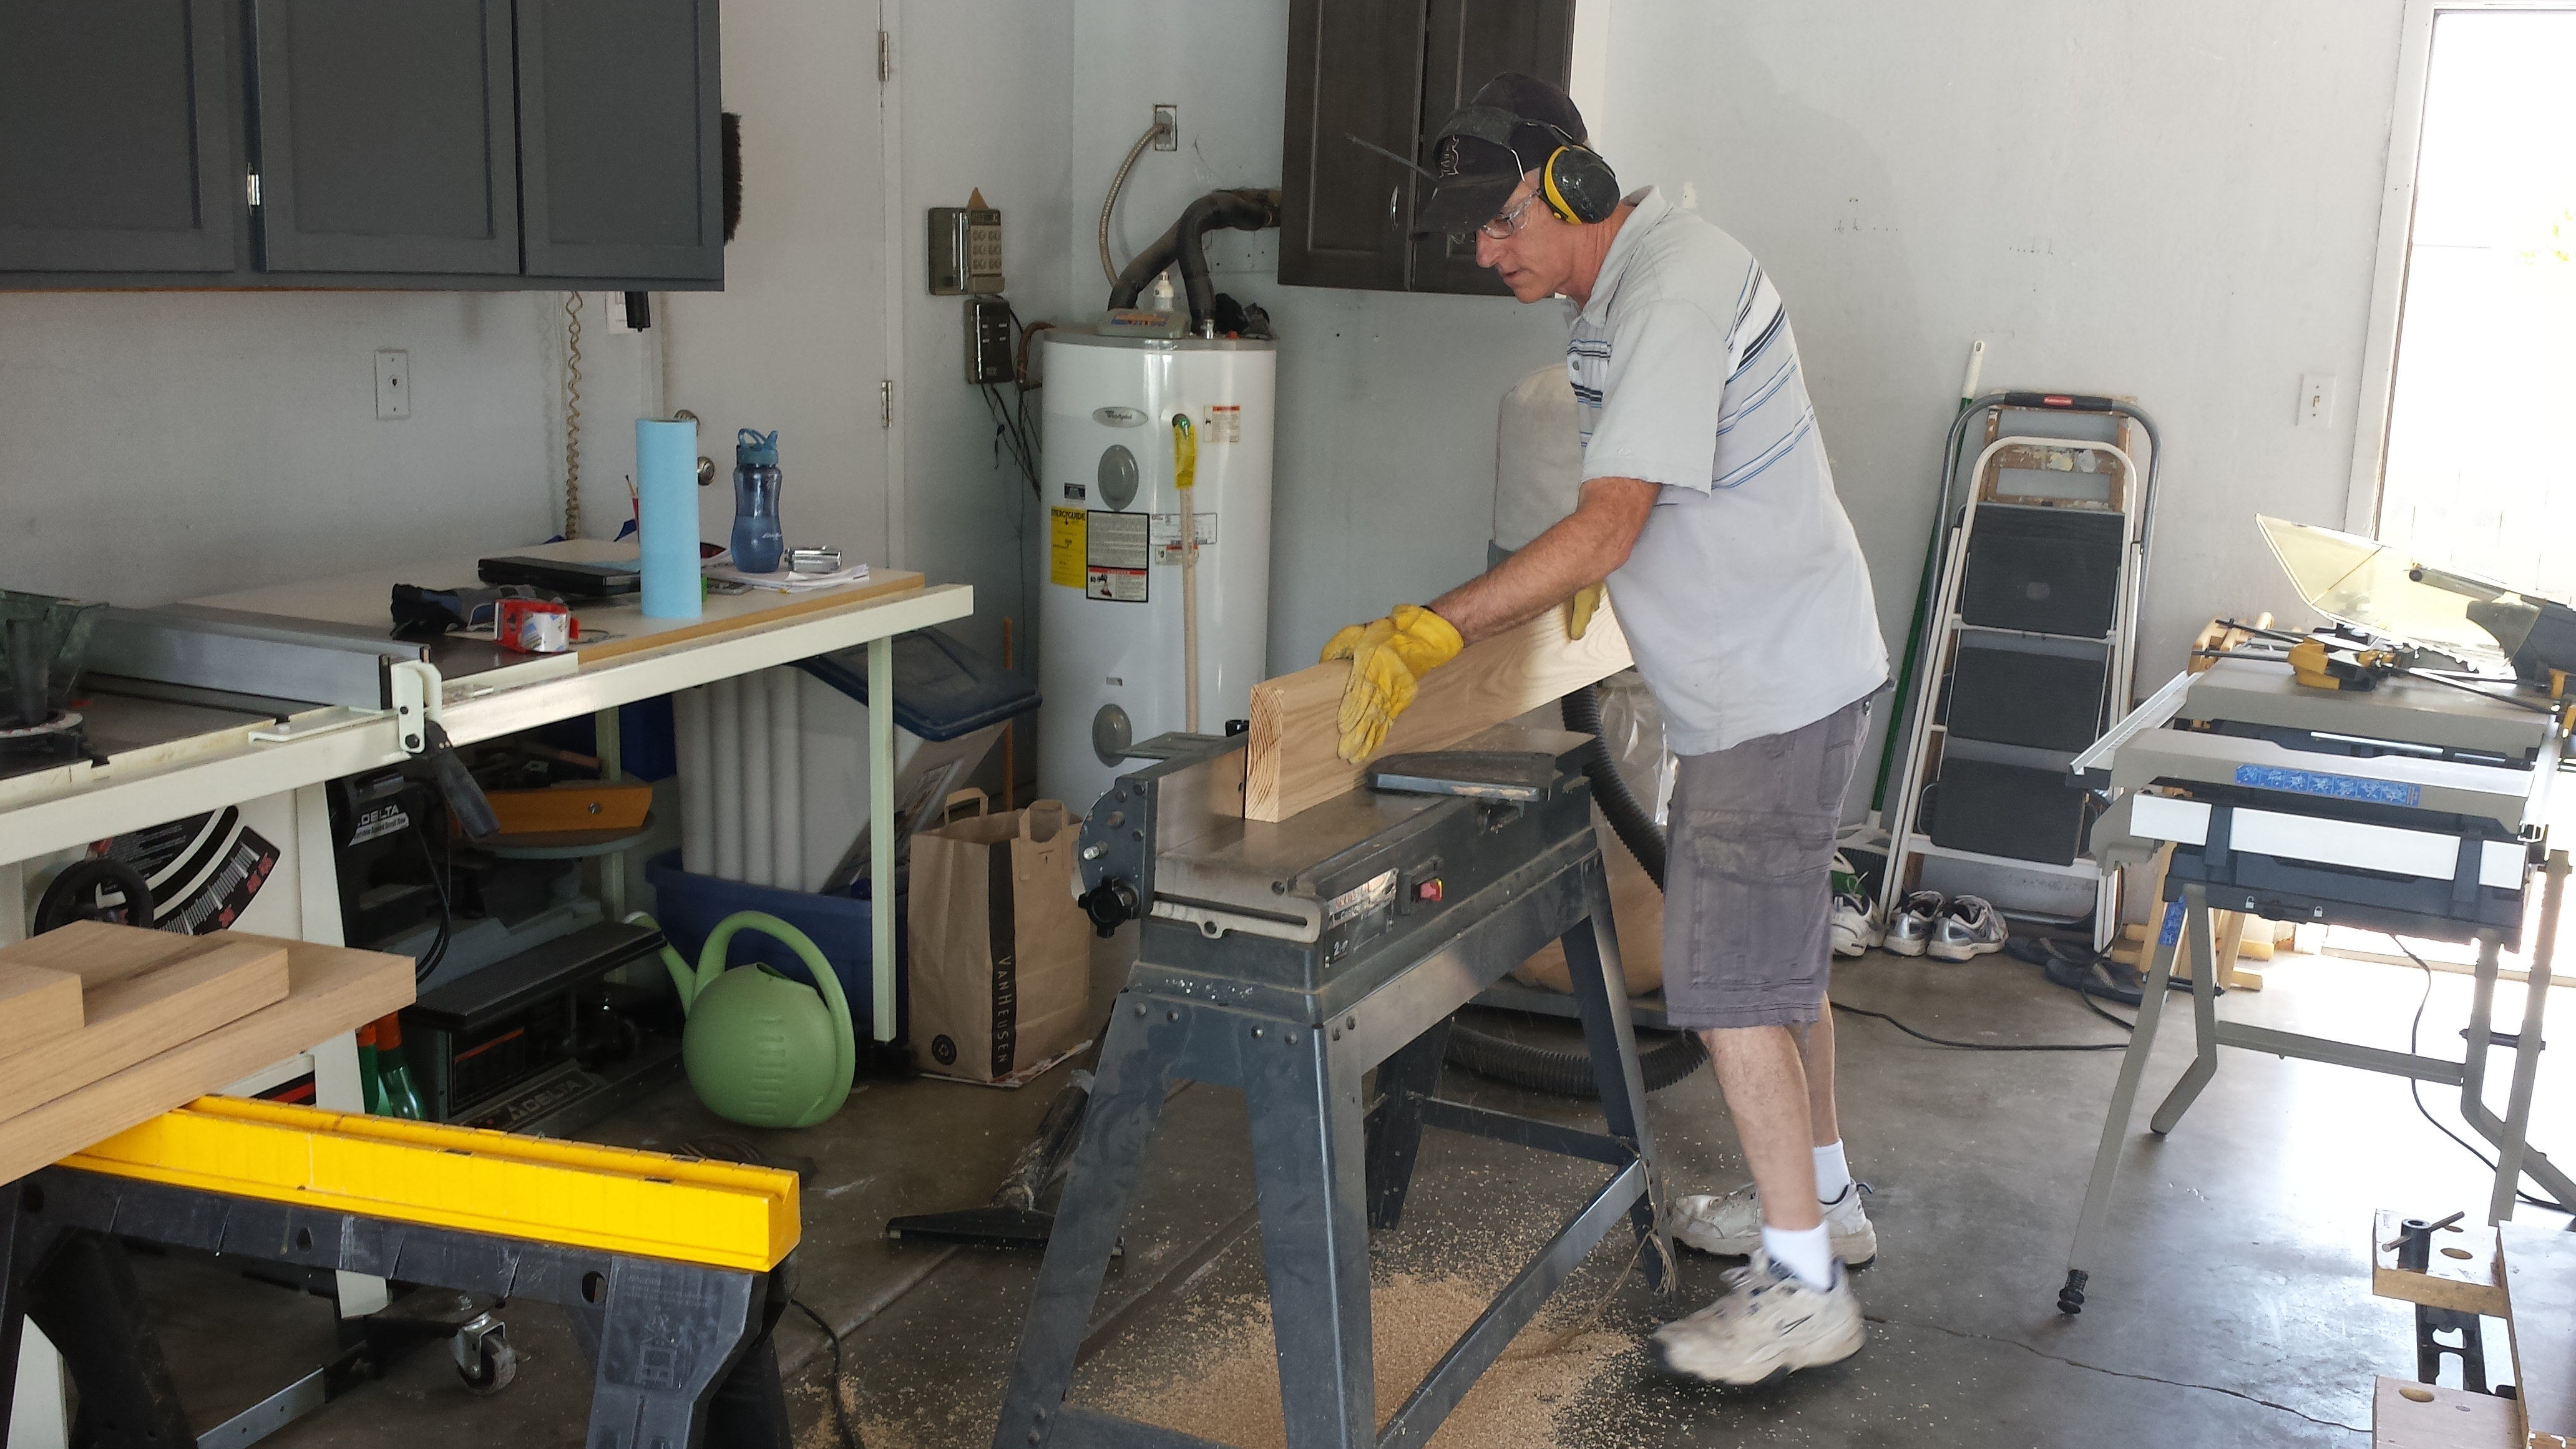 My dad using the jointer to square up the edges and make a nice flat surface for the legs of the furniture.